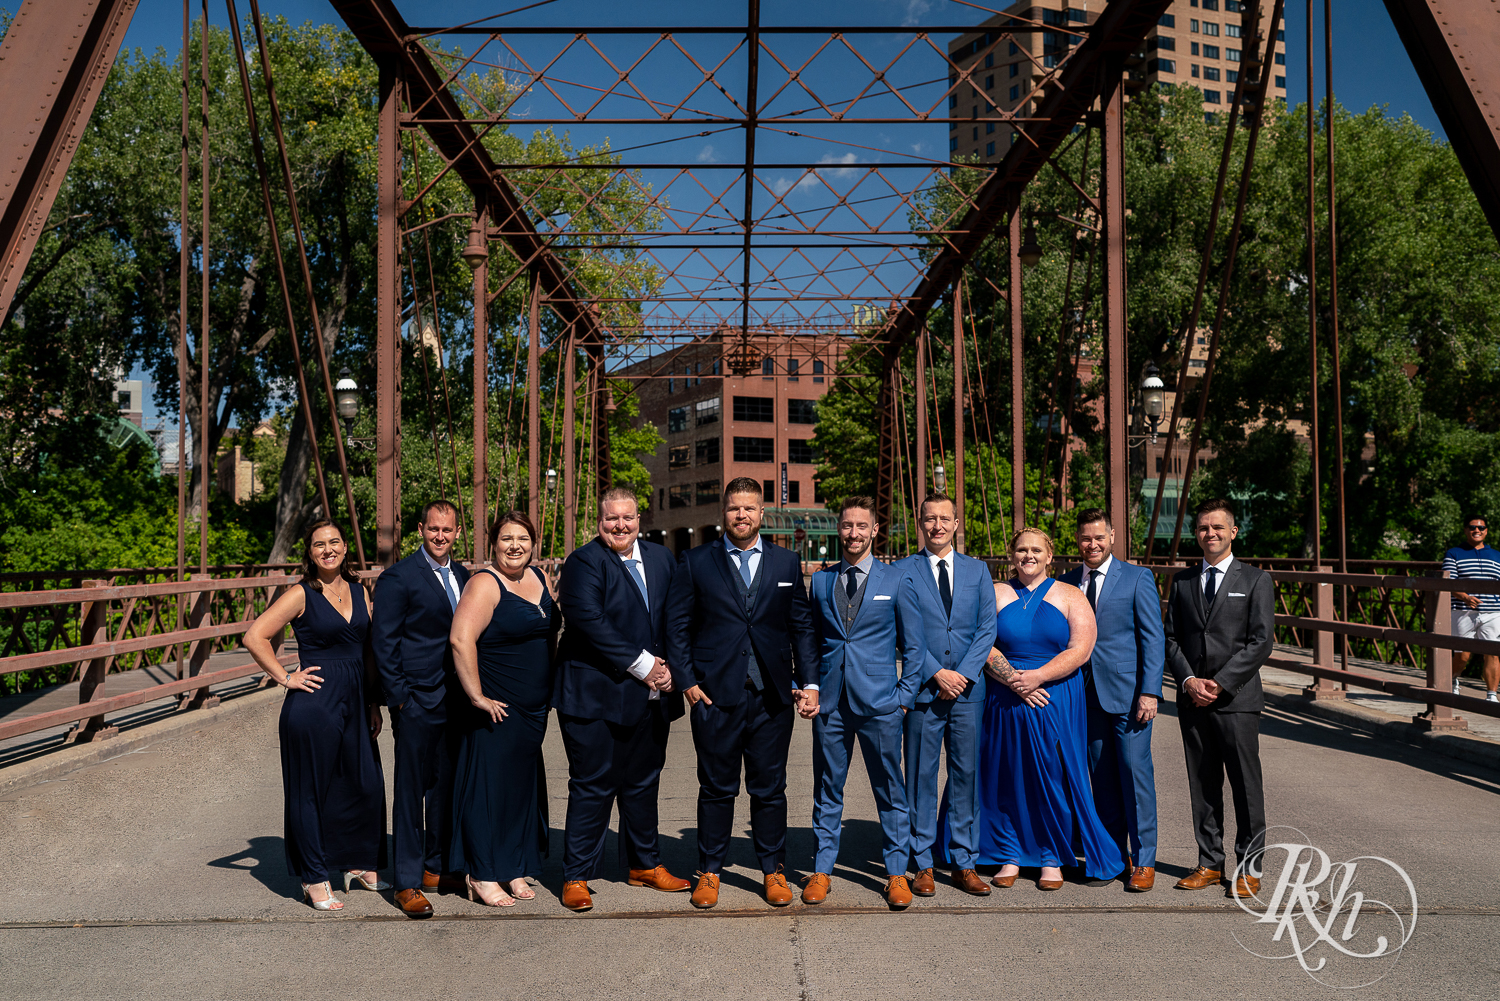 Gay wedding party dressed in blue suits and dresses smiling on bridge in Nicollet Island in Minneapolis, Minnesota on a sunny day.